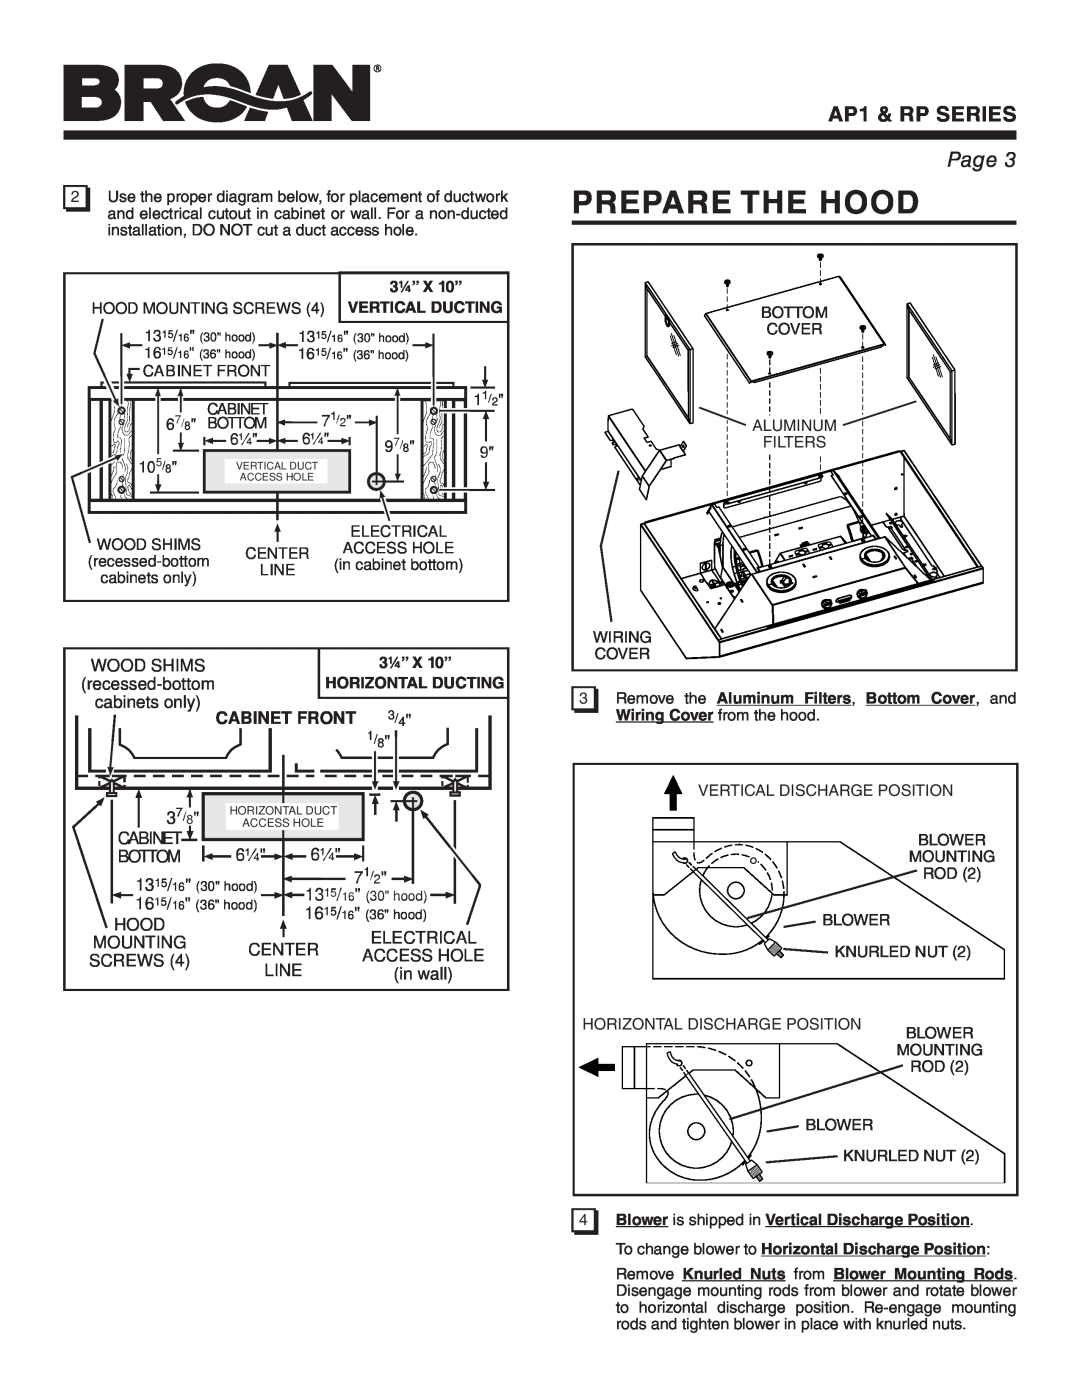 Broan warranty Prepare The Hood, CABINET FRONT 3/4, Cabinet, Bottom, AP1 & RP SERIES, Page 